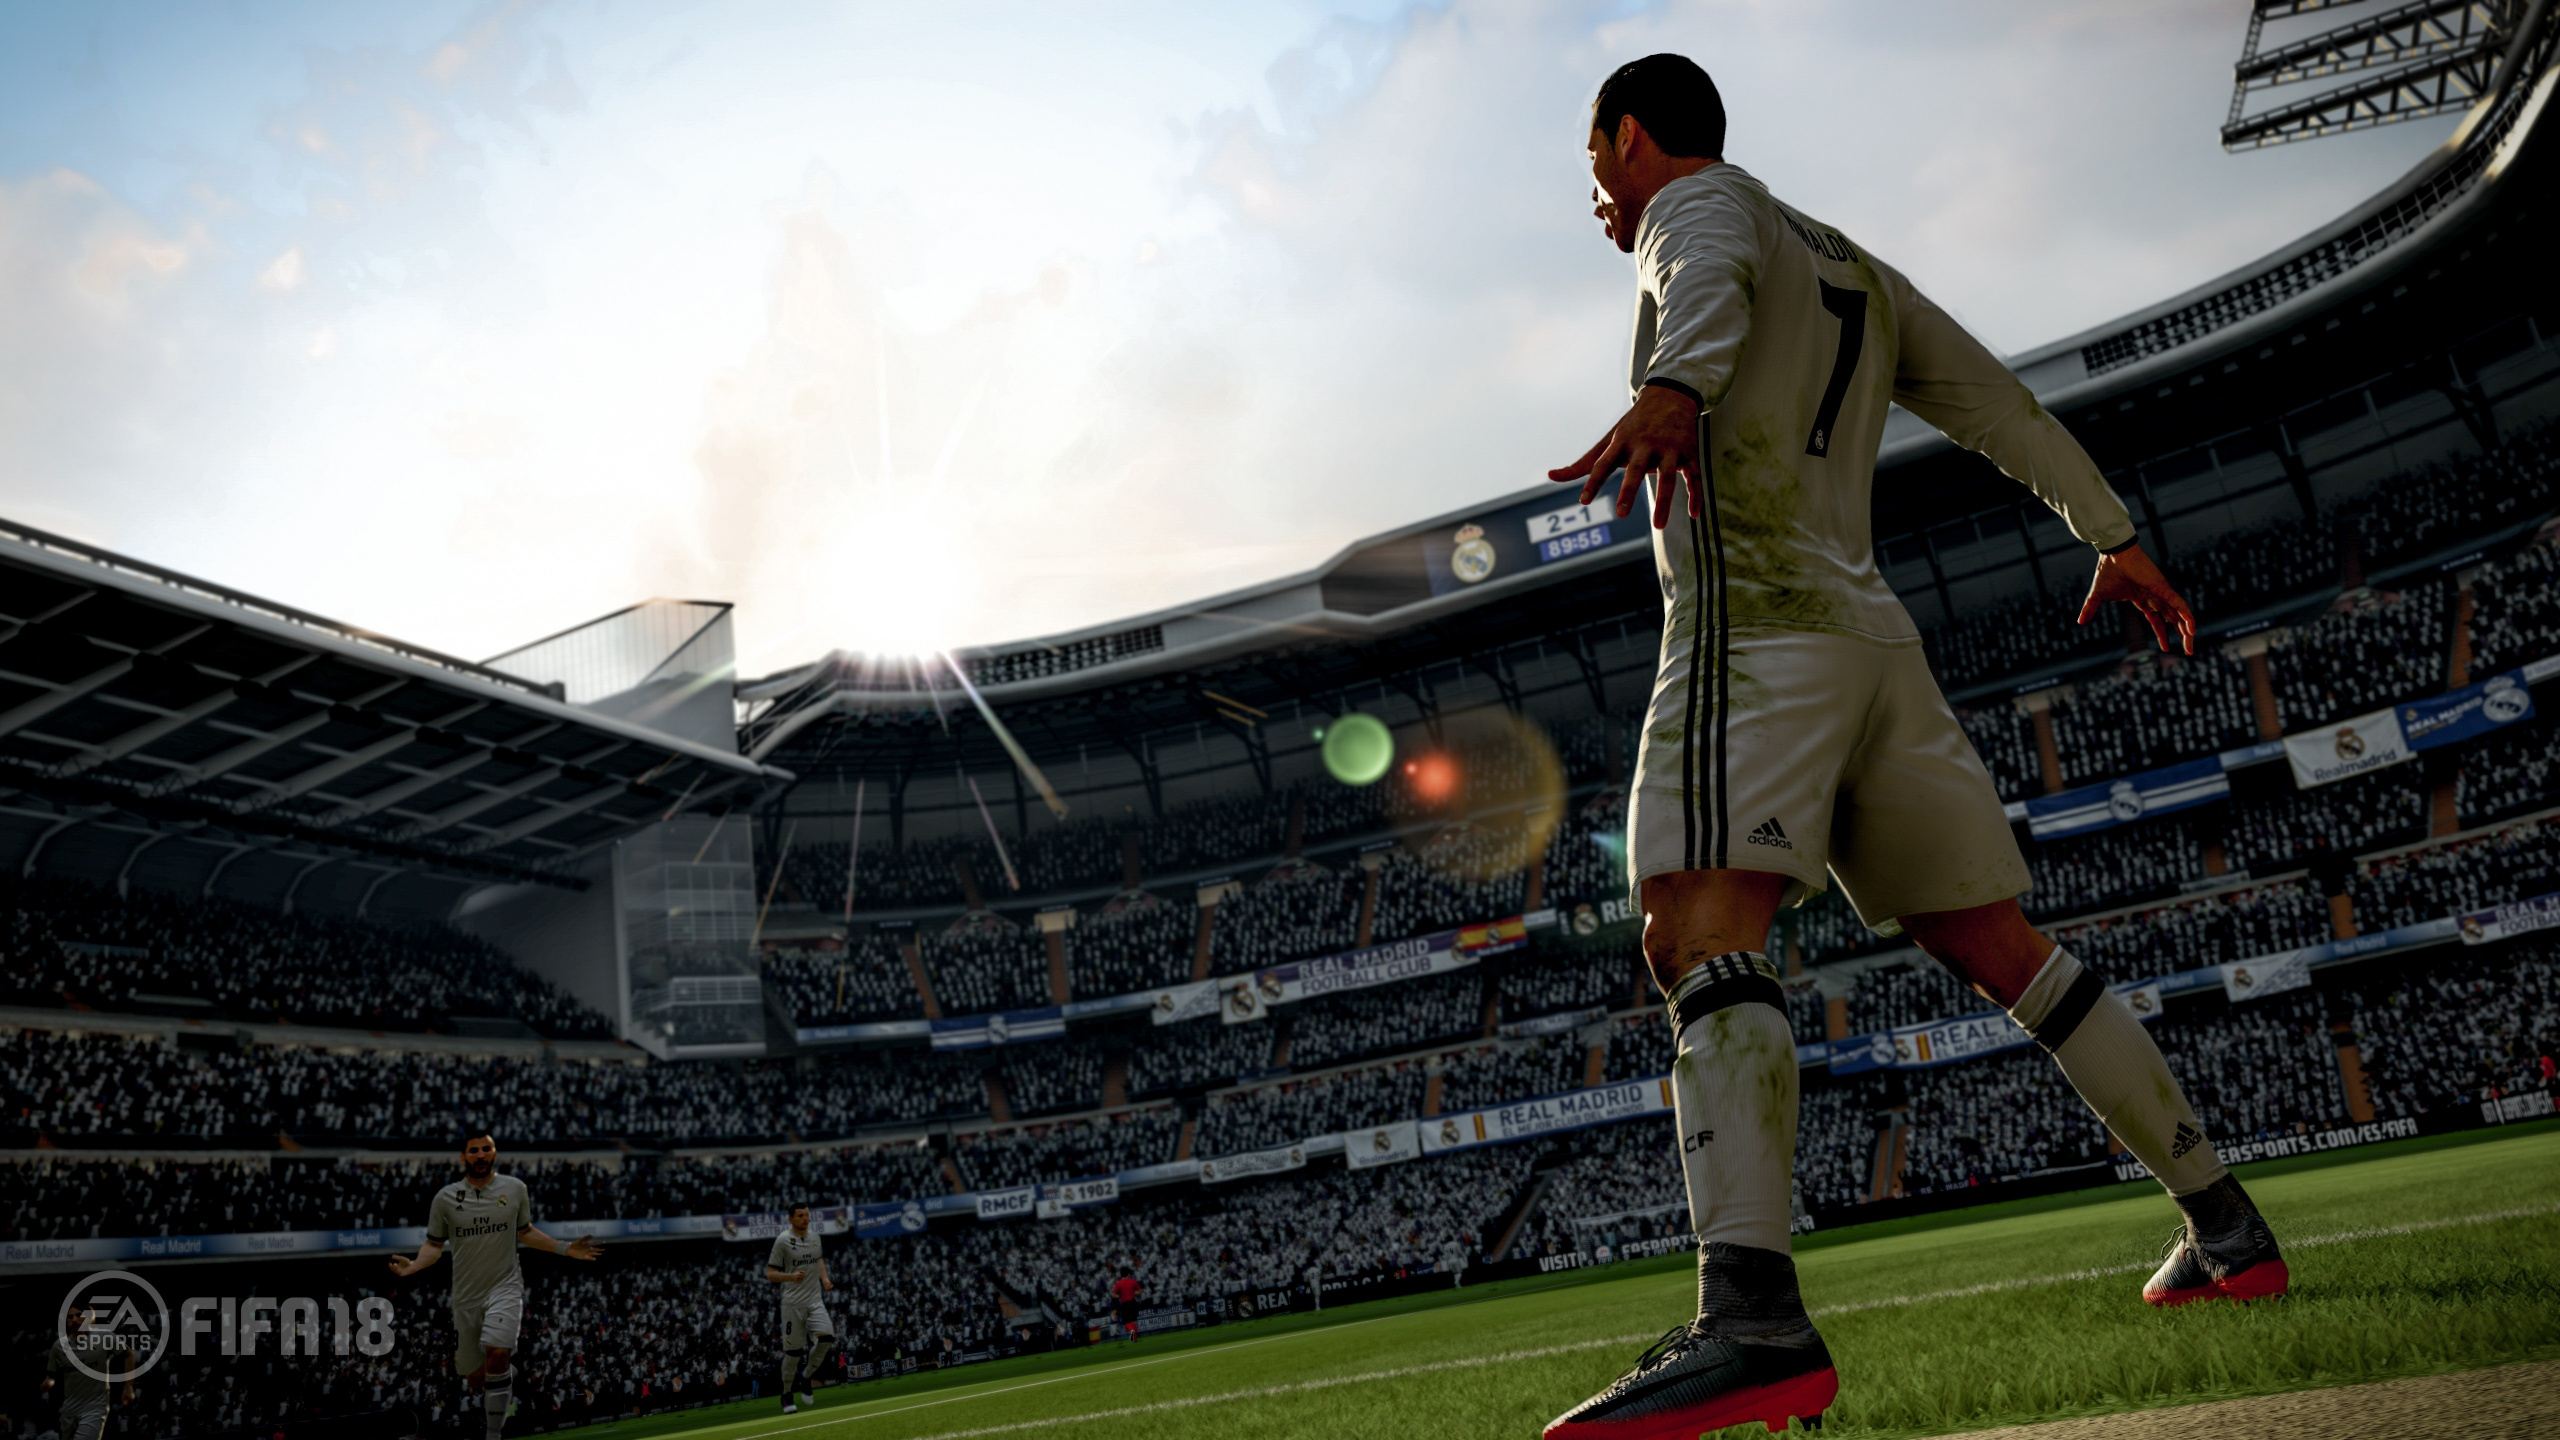 FIFA 18, ea Sports, Electronic Arts, Sports Venue, Stadion. Wallpaper in 2560x1440 Resolution